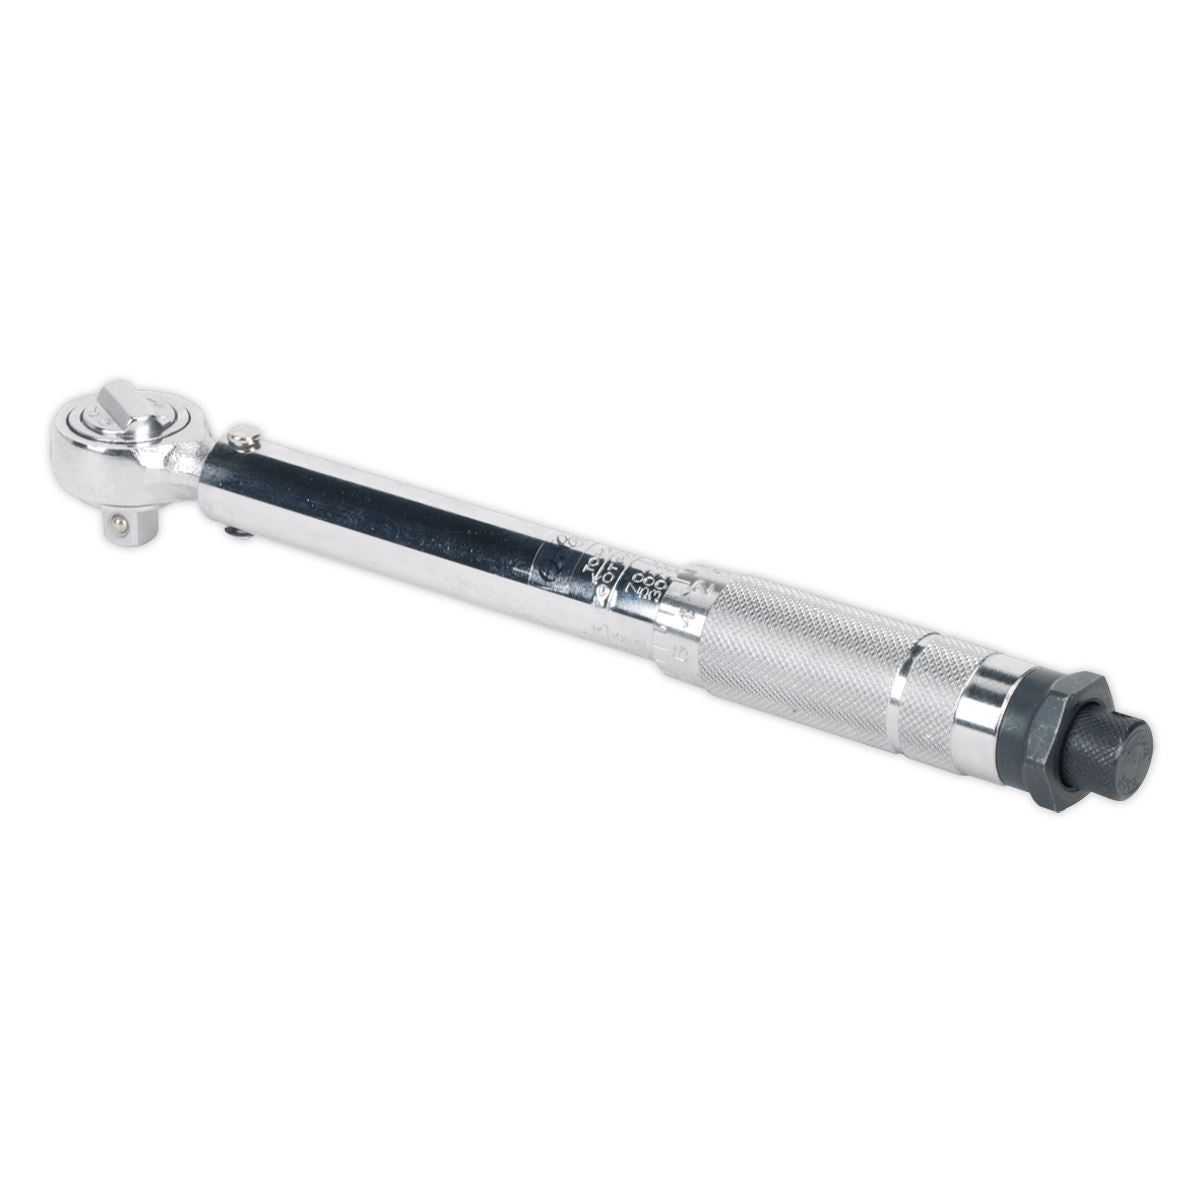 Sealey Premier Micrometer Torque Wrench 3/8"Sq Drive